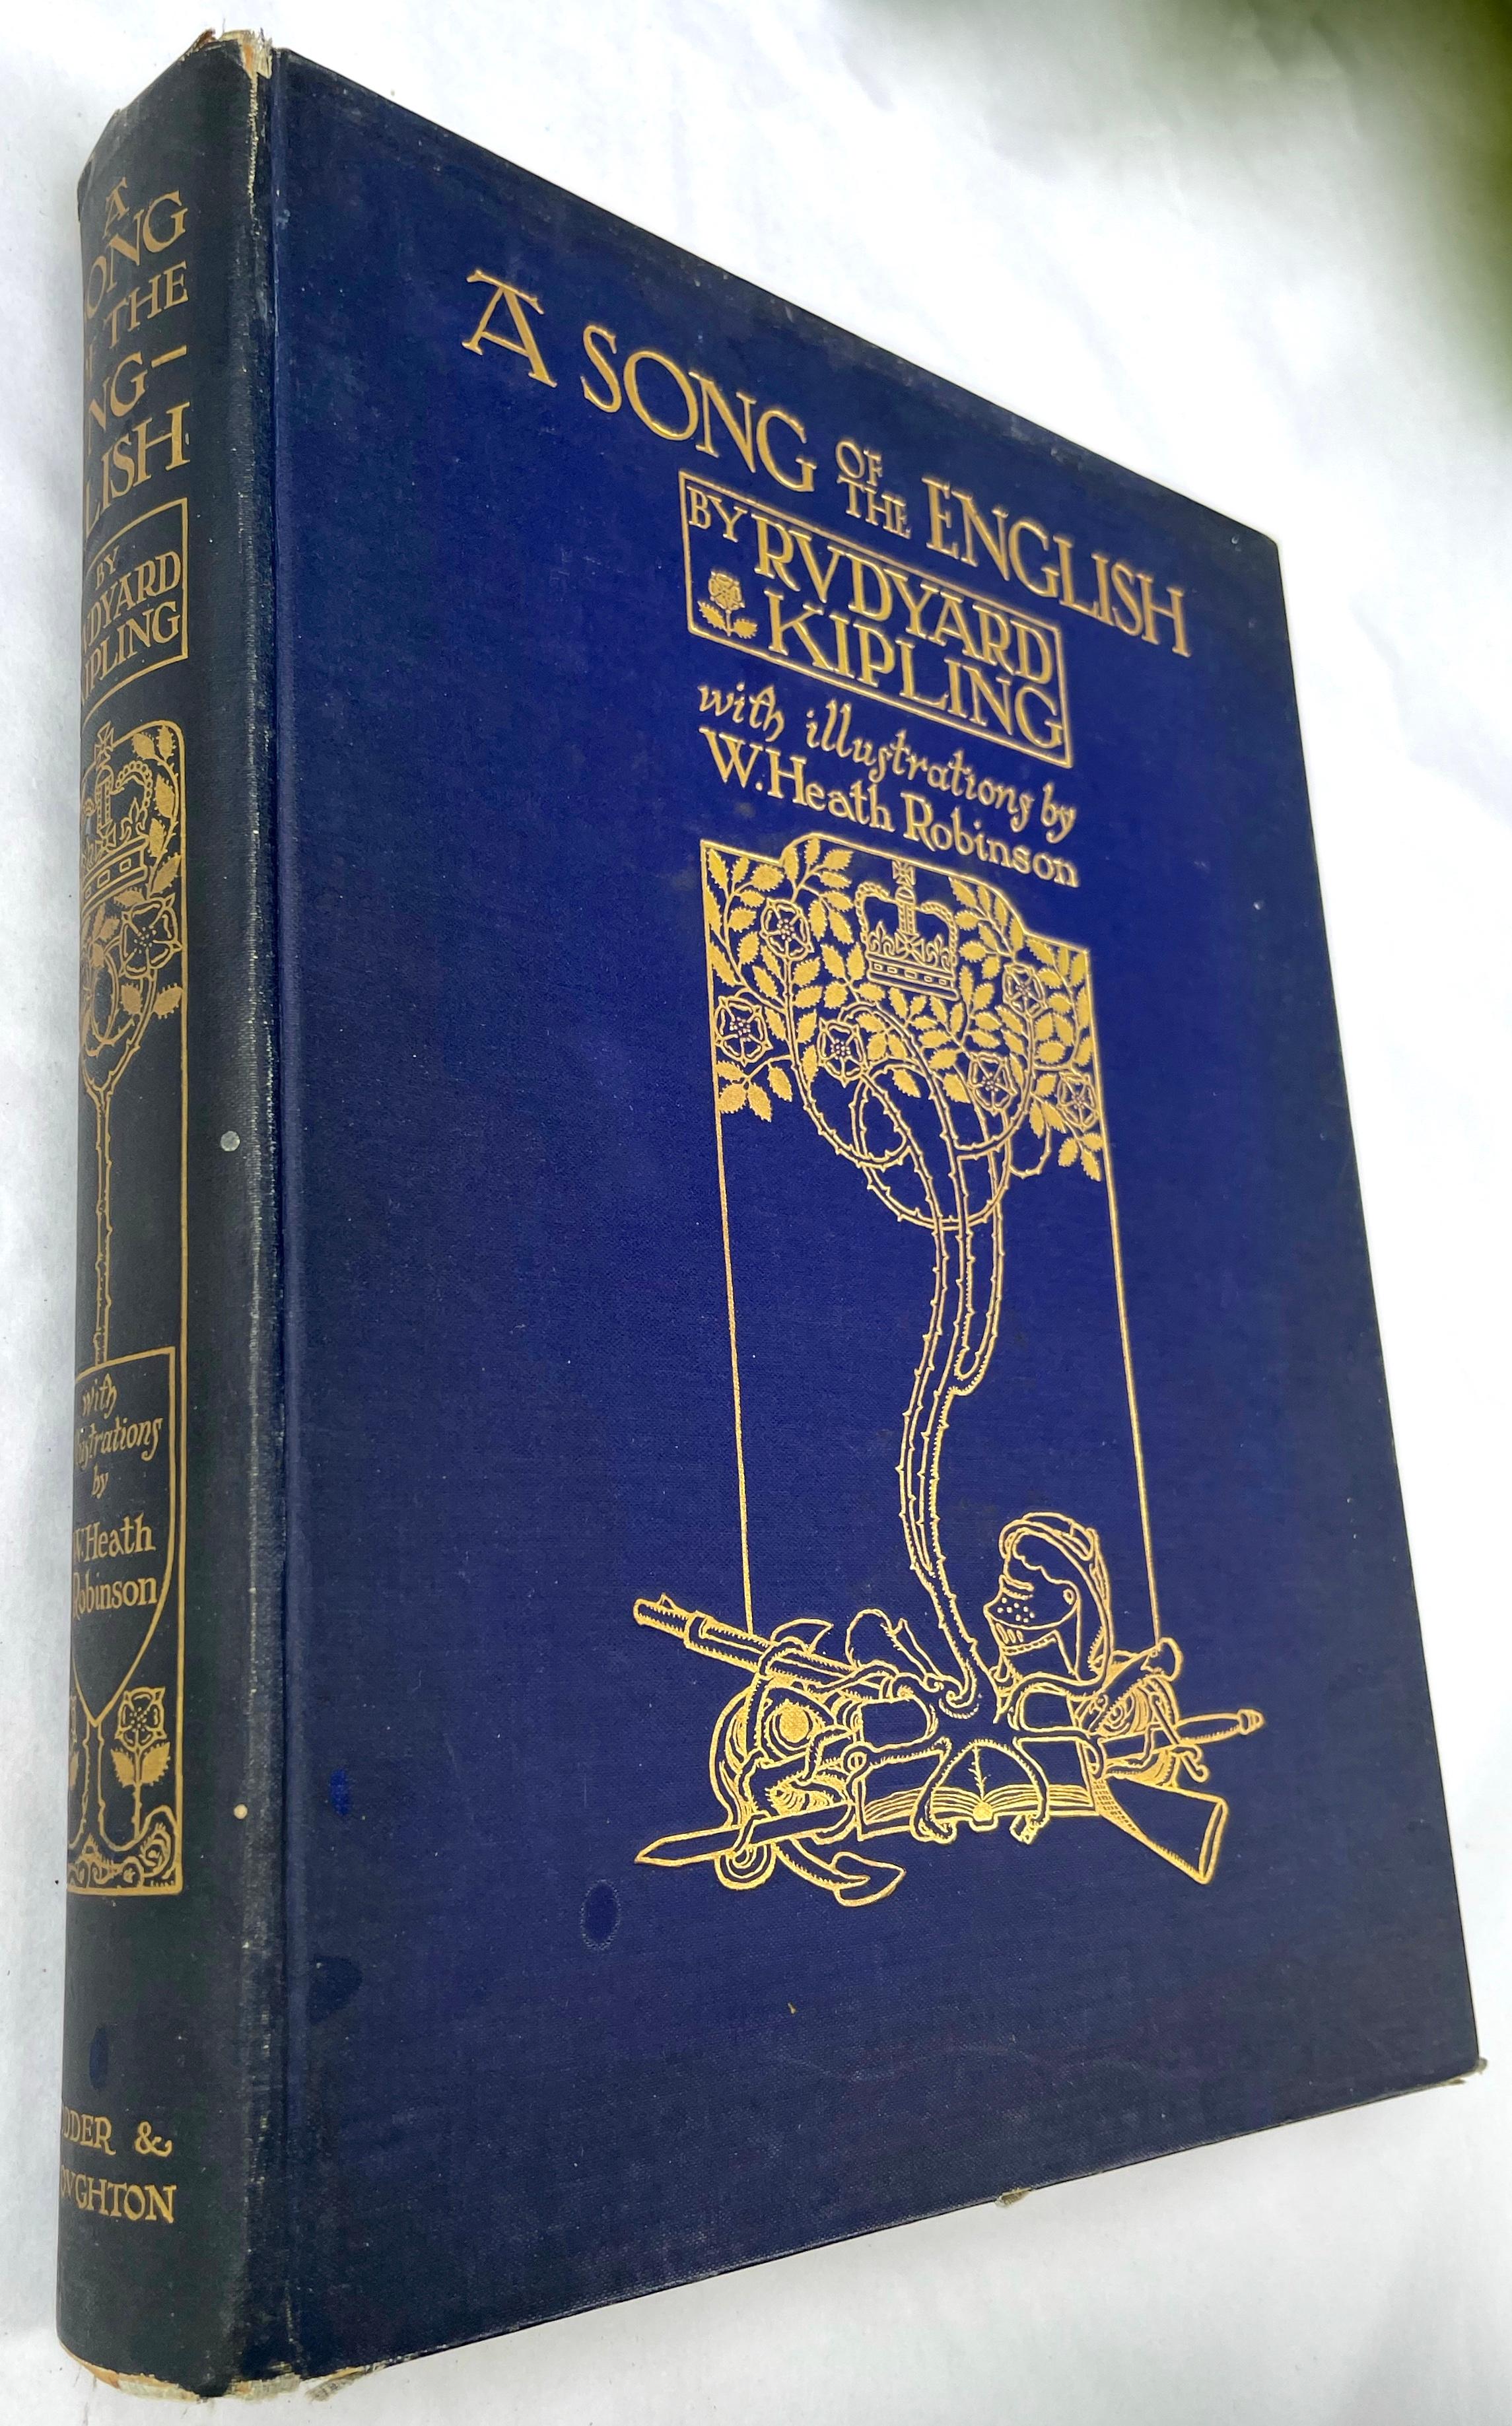 First edition a song of The English by Rudyard Kipling. Original blue cloth with front cover pictorially stamped in gilt on front cover and spine. edition of illustrated work by Robinson. Large quarto (10 15/16 x 8 5/8 inches). Thirty color plates